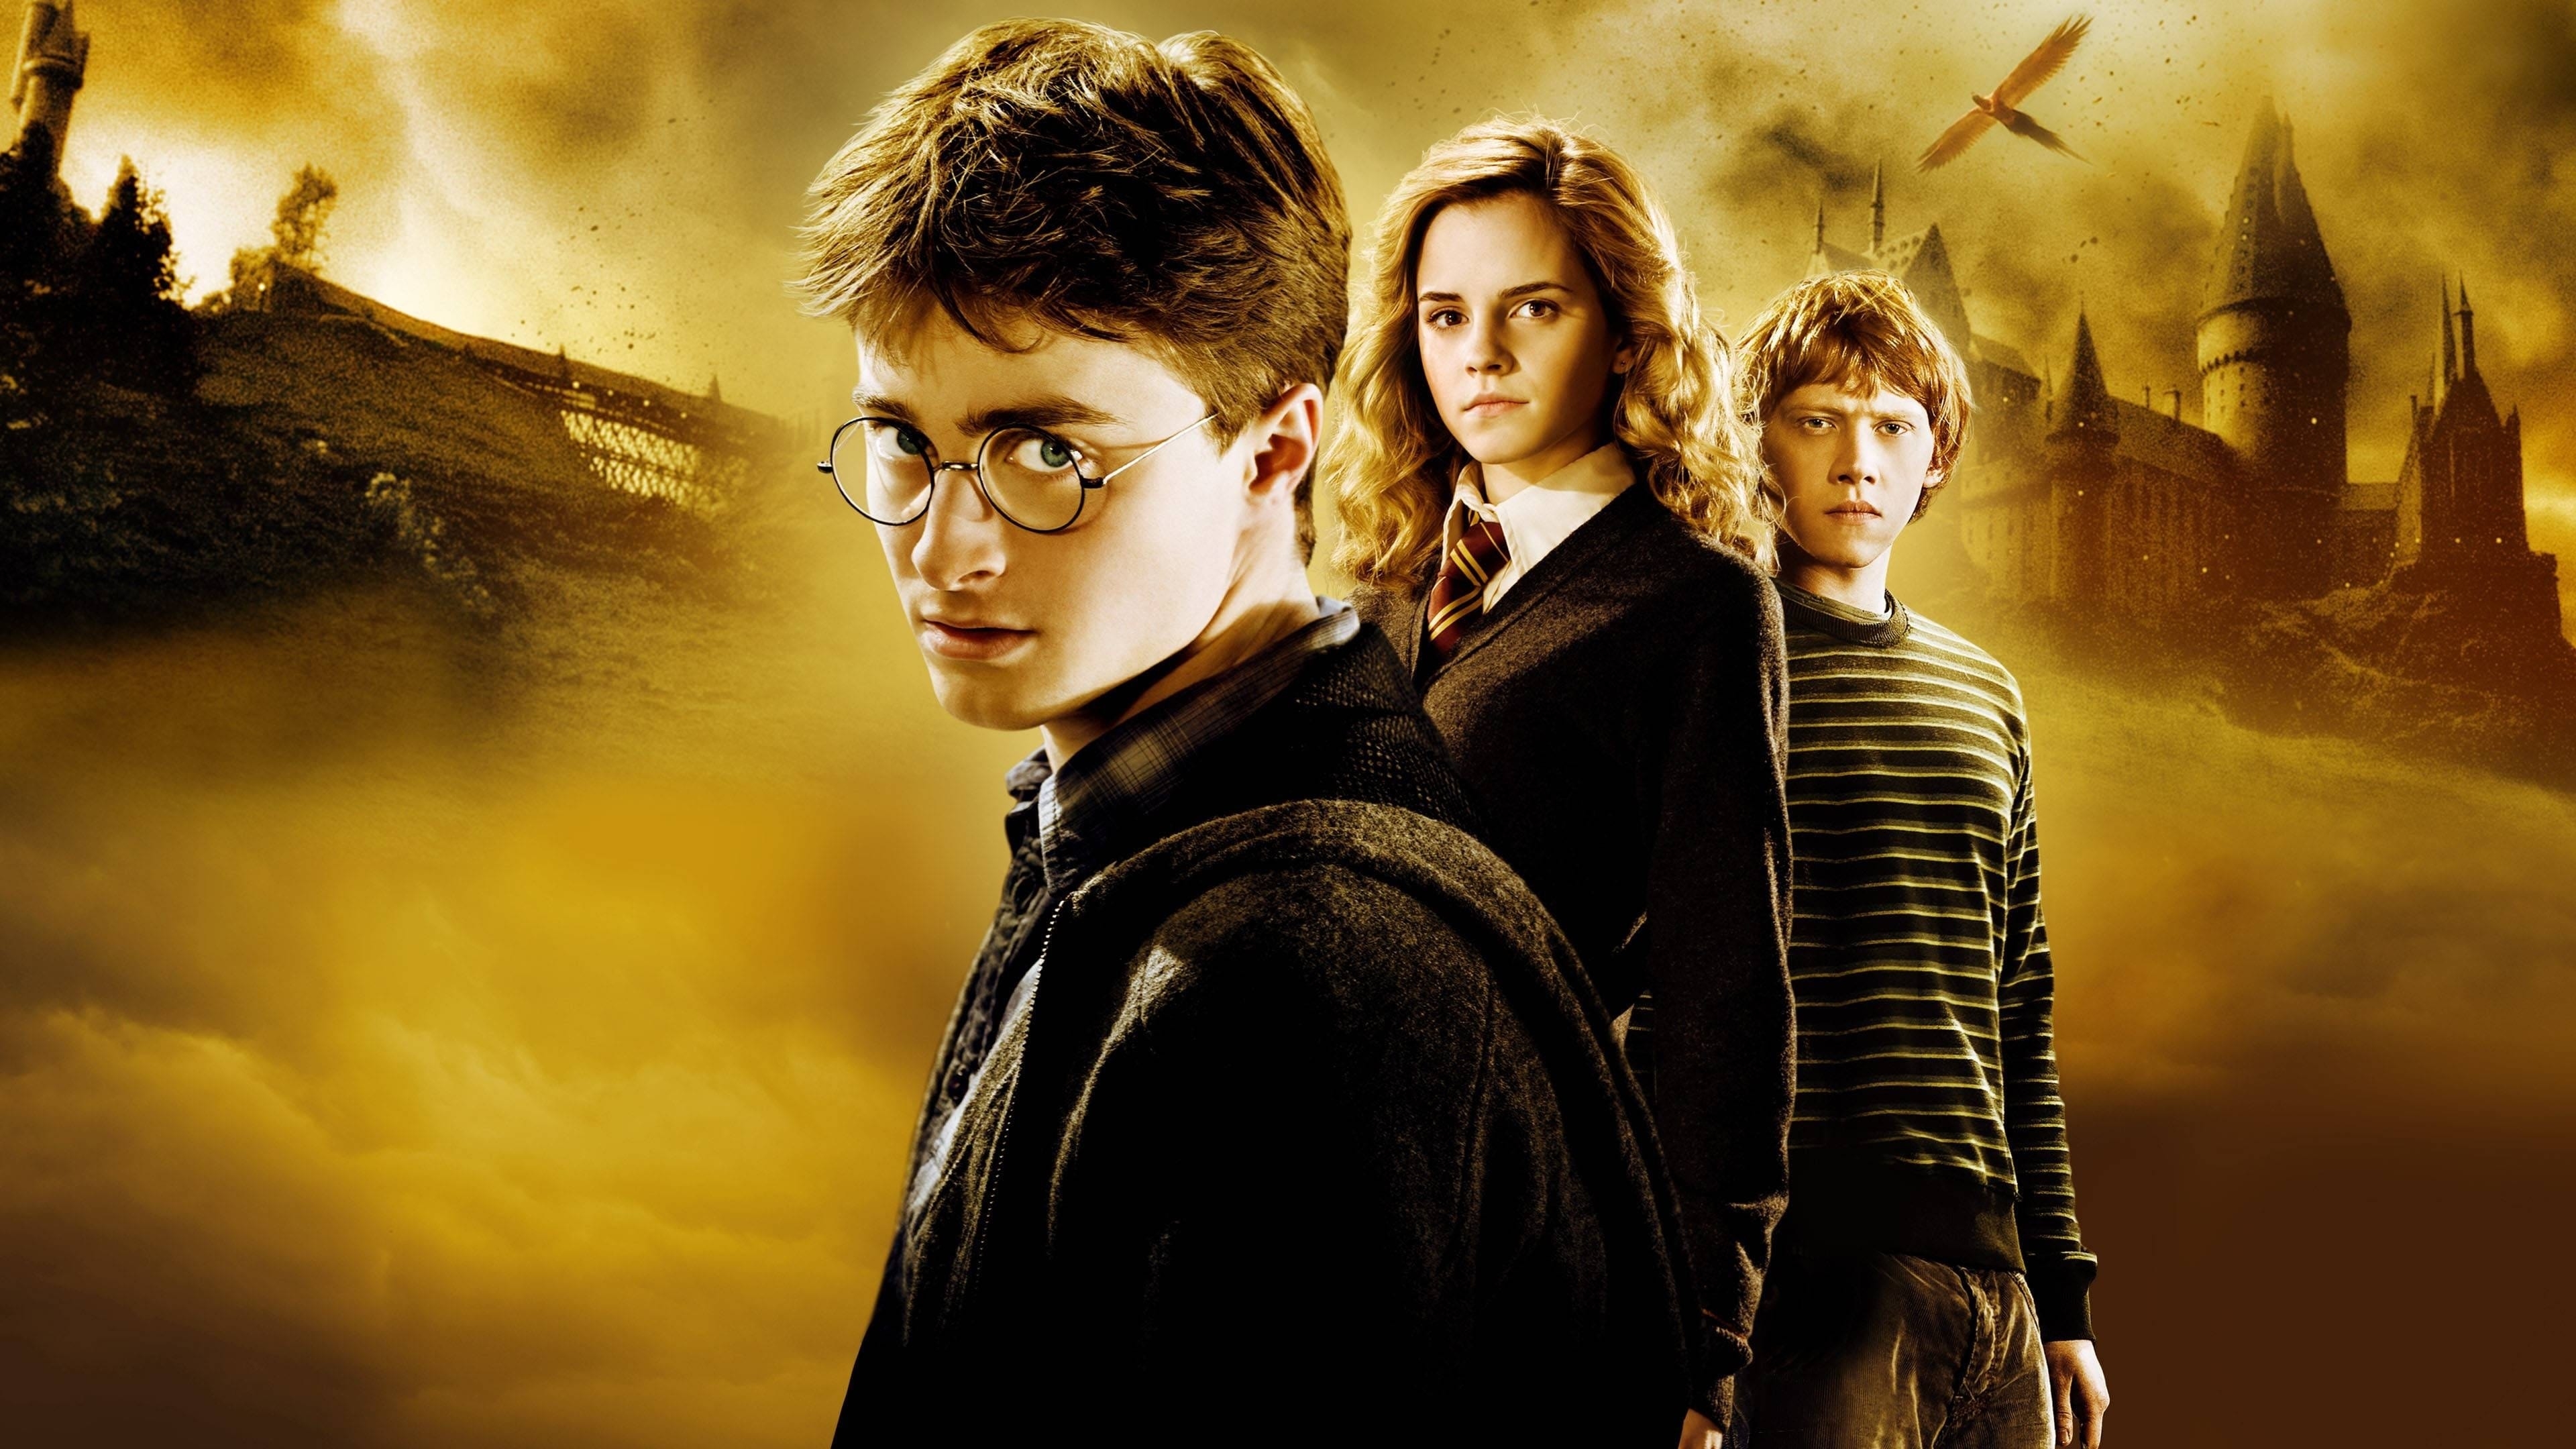 HD wallpaper, Harry Potter And The Half Blood Prince, Emma Watson As Hermione Granger, Ron Weasley, Daniel Radcliffe As Harry Potter